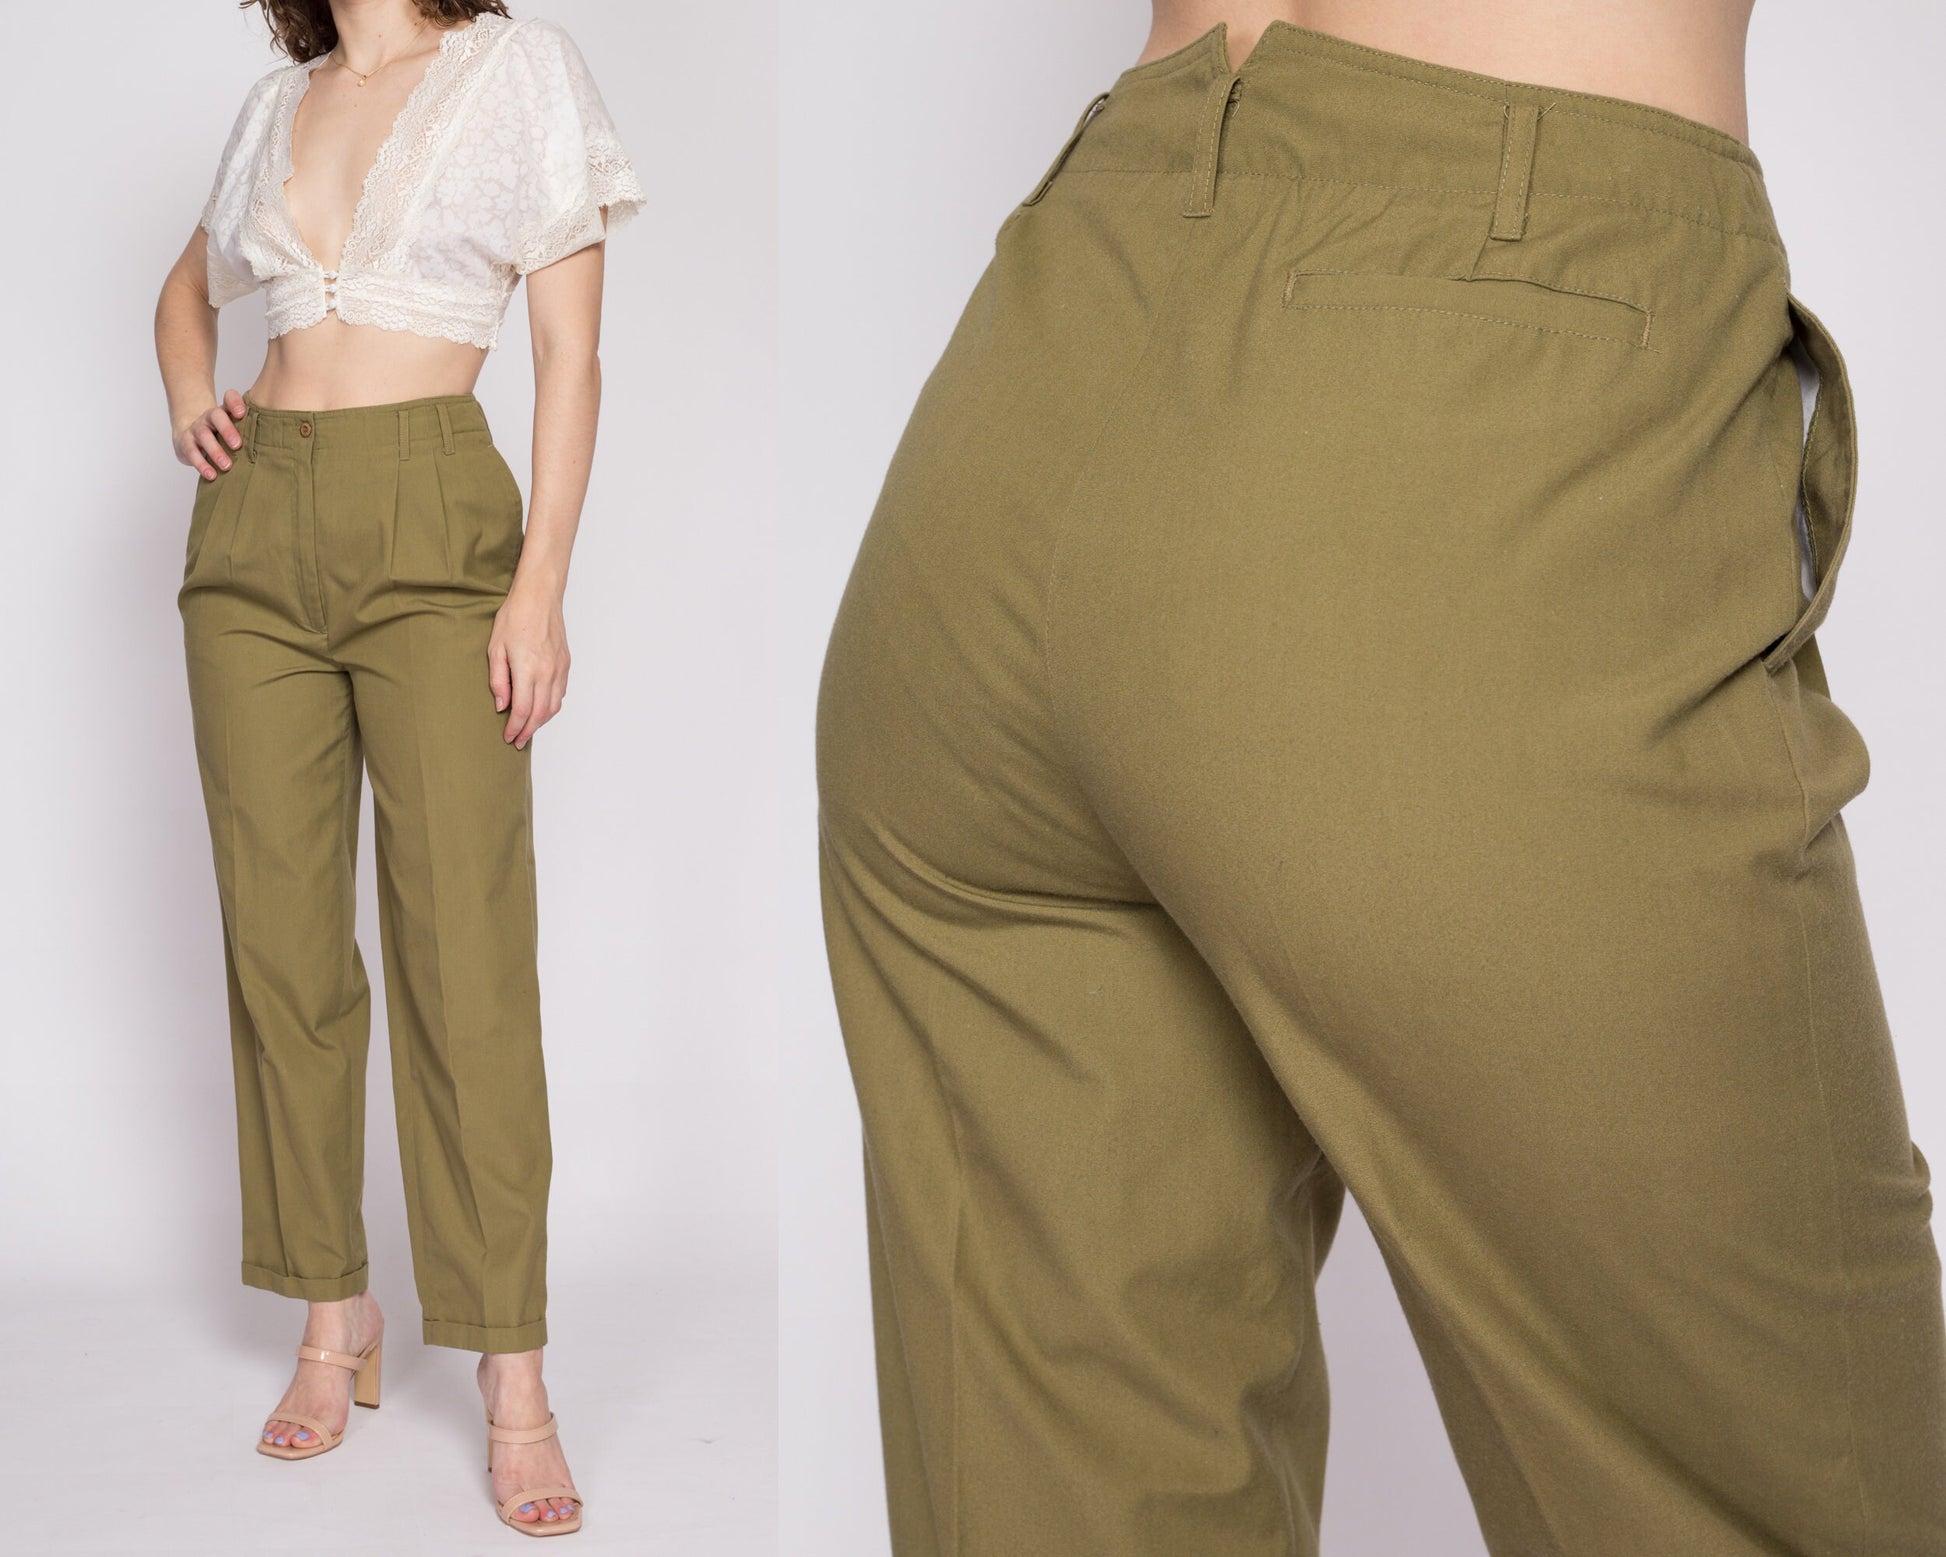 High-Waist Pleated Pants. Cuff & Pockets. Brown or Olive